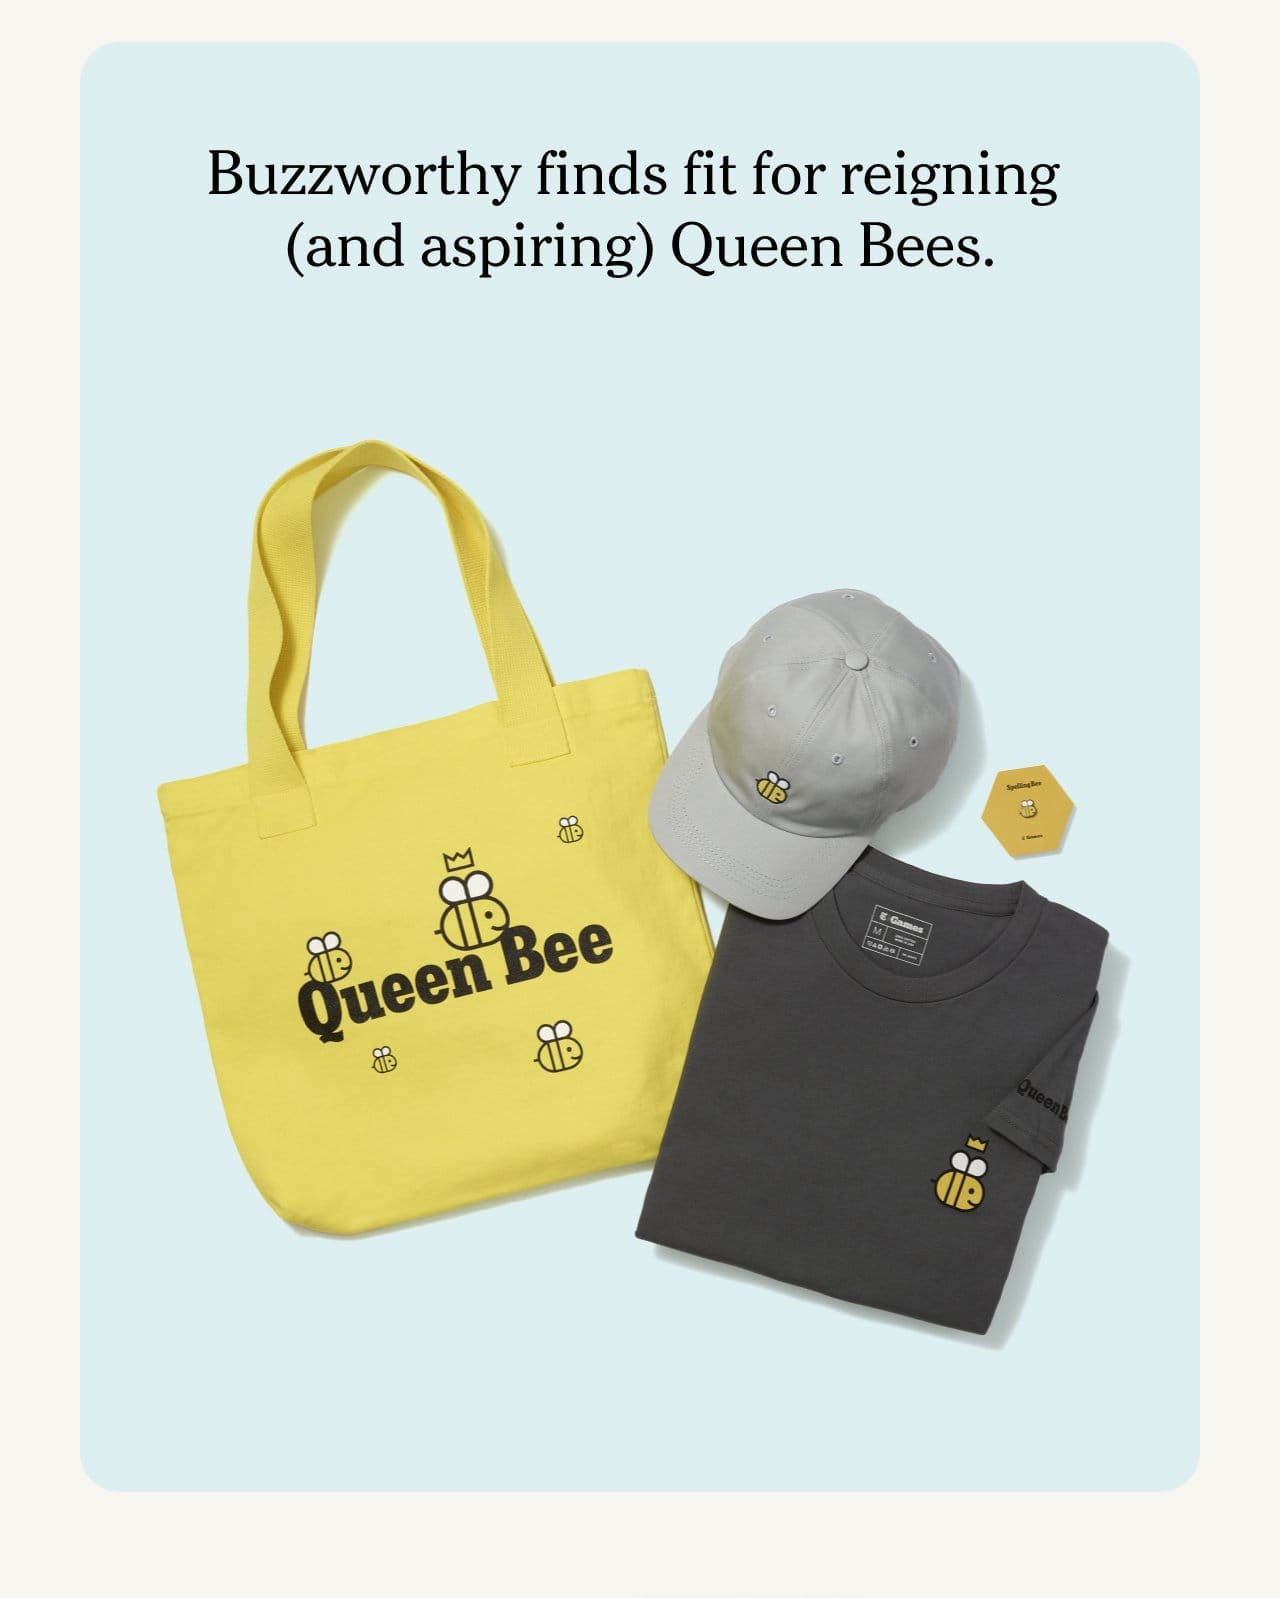 Buzzworthy finds fit for reigning (and aspiring) Queen Bees.